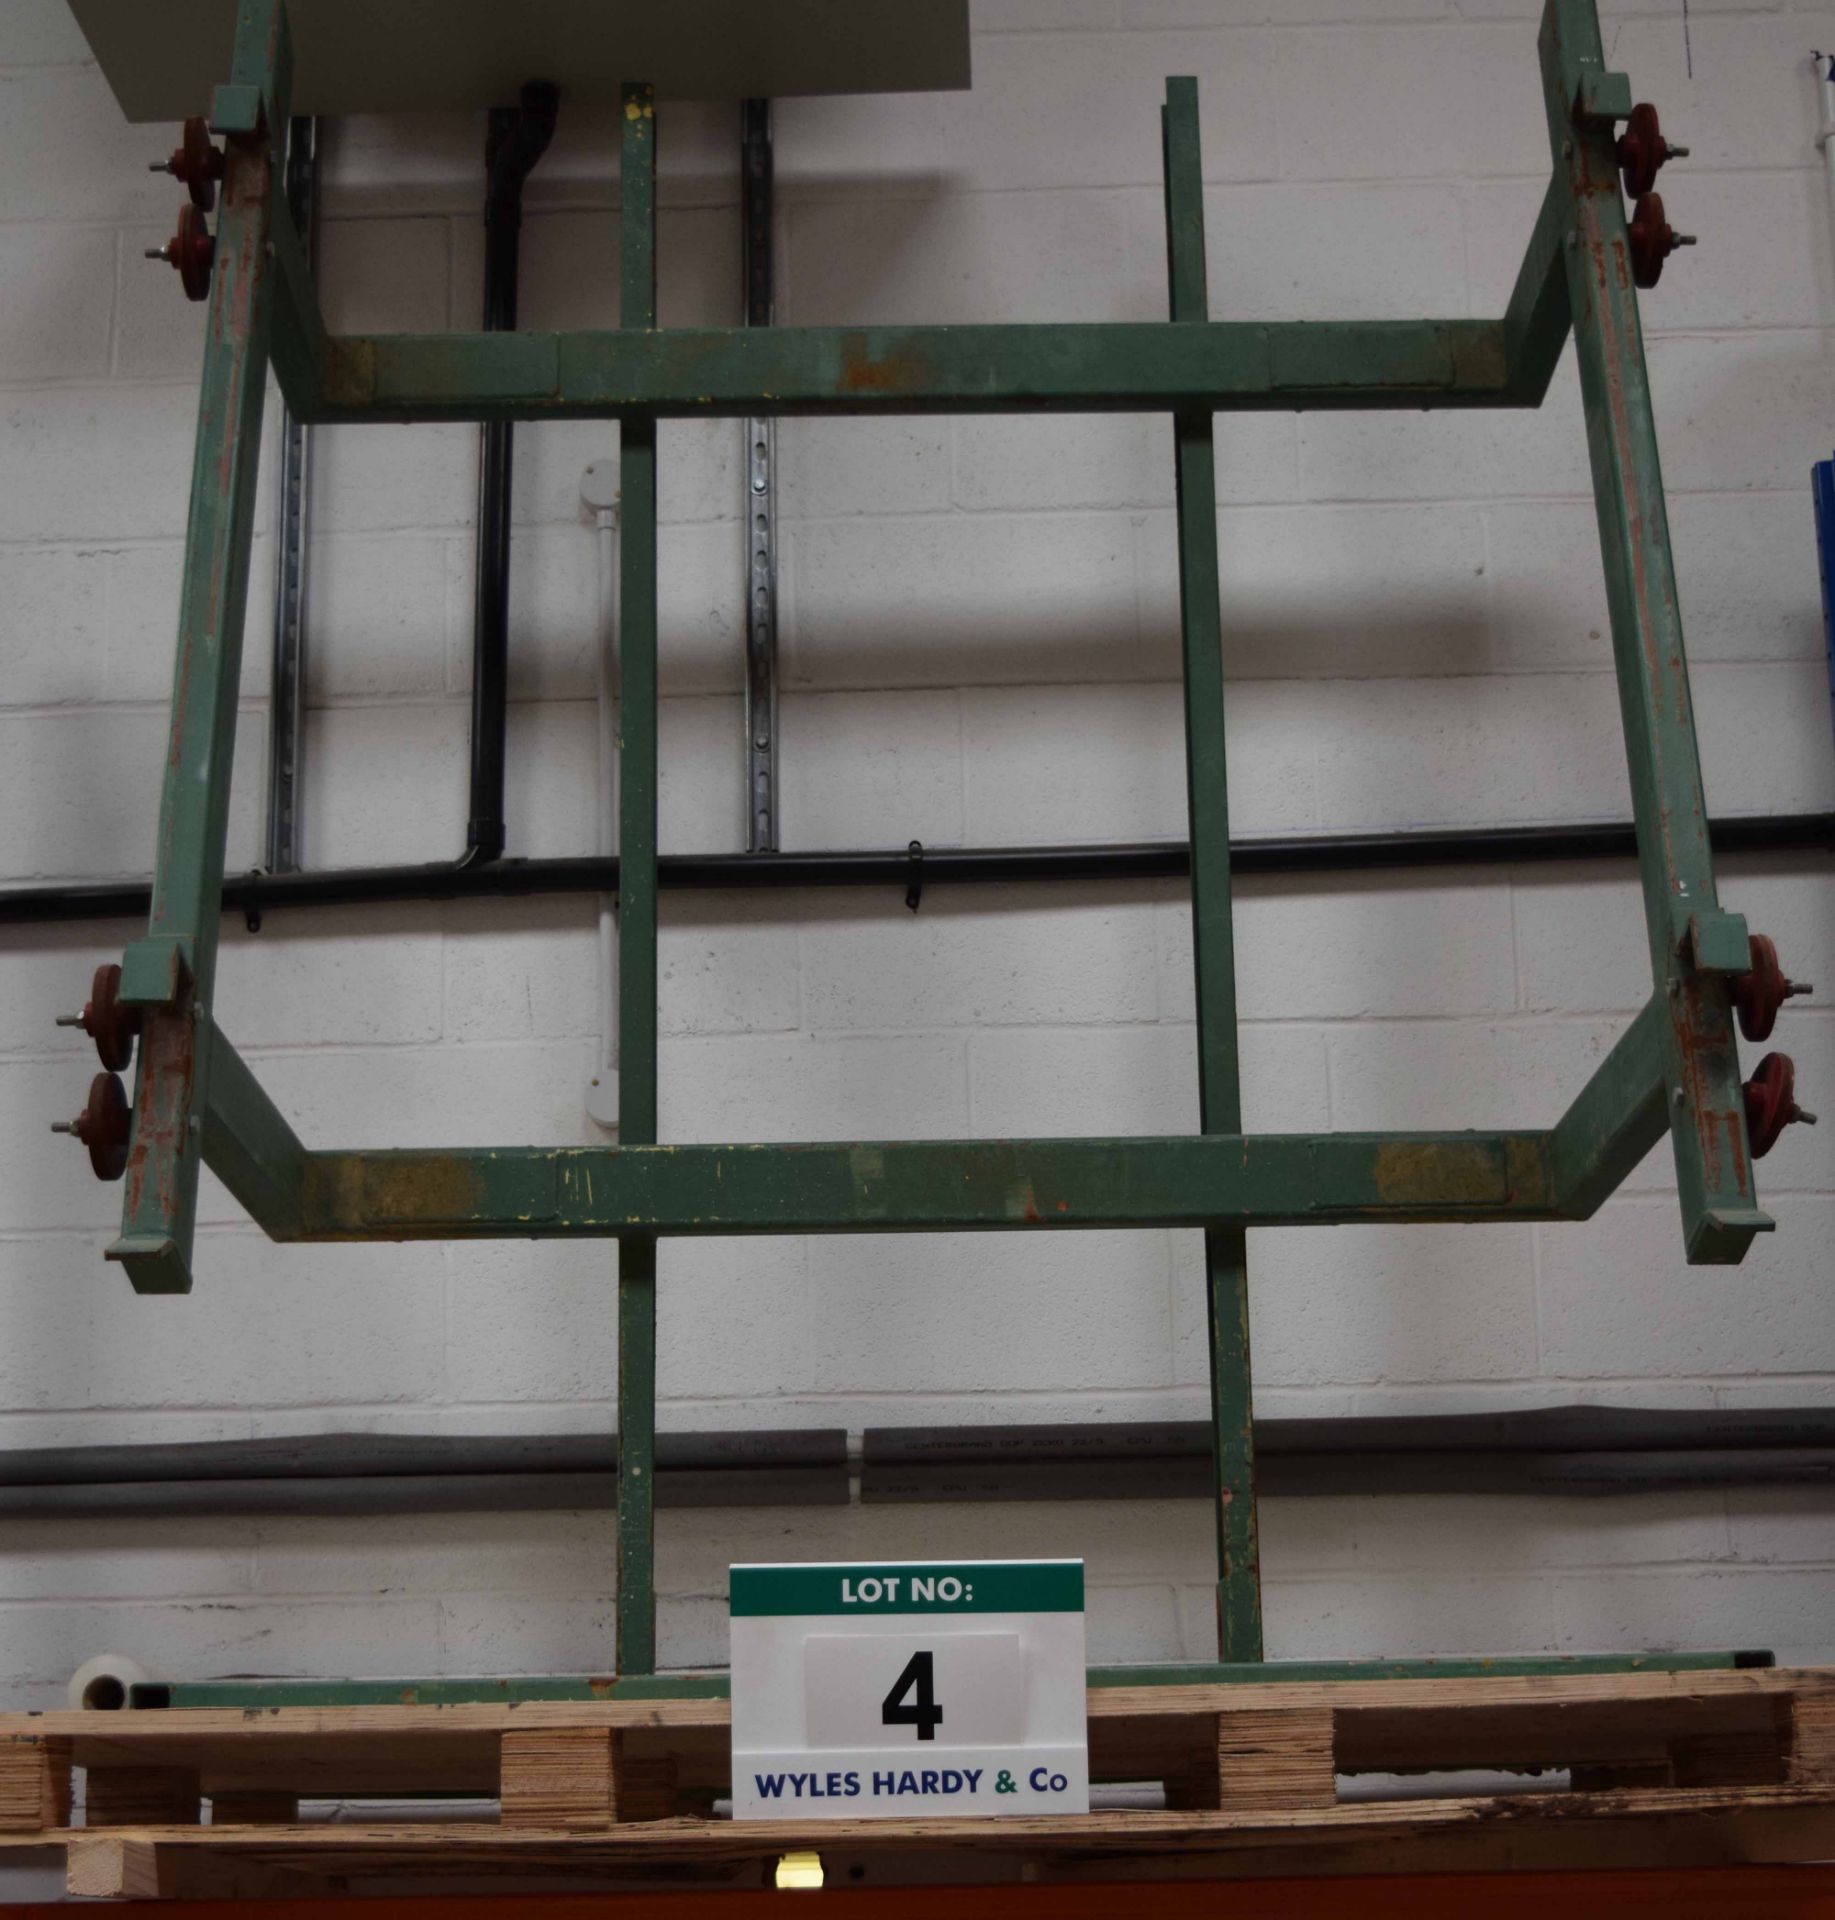 A Welded Steel Twin Drum Cable Running Jig (Can be mounted on Plant Trailer for Site Work)